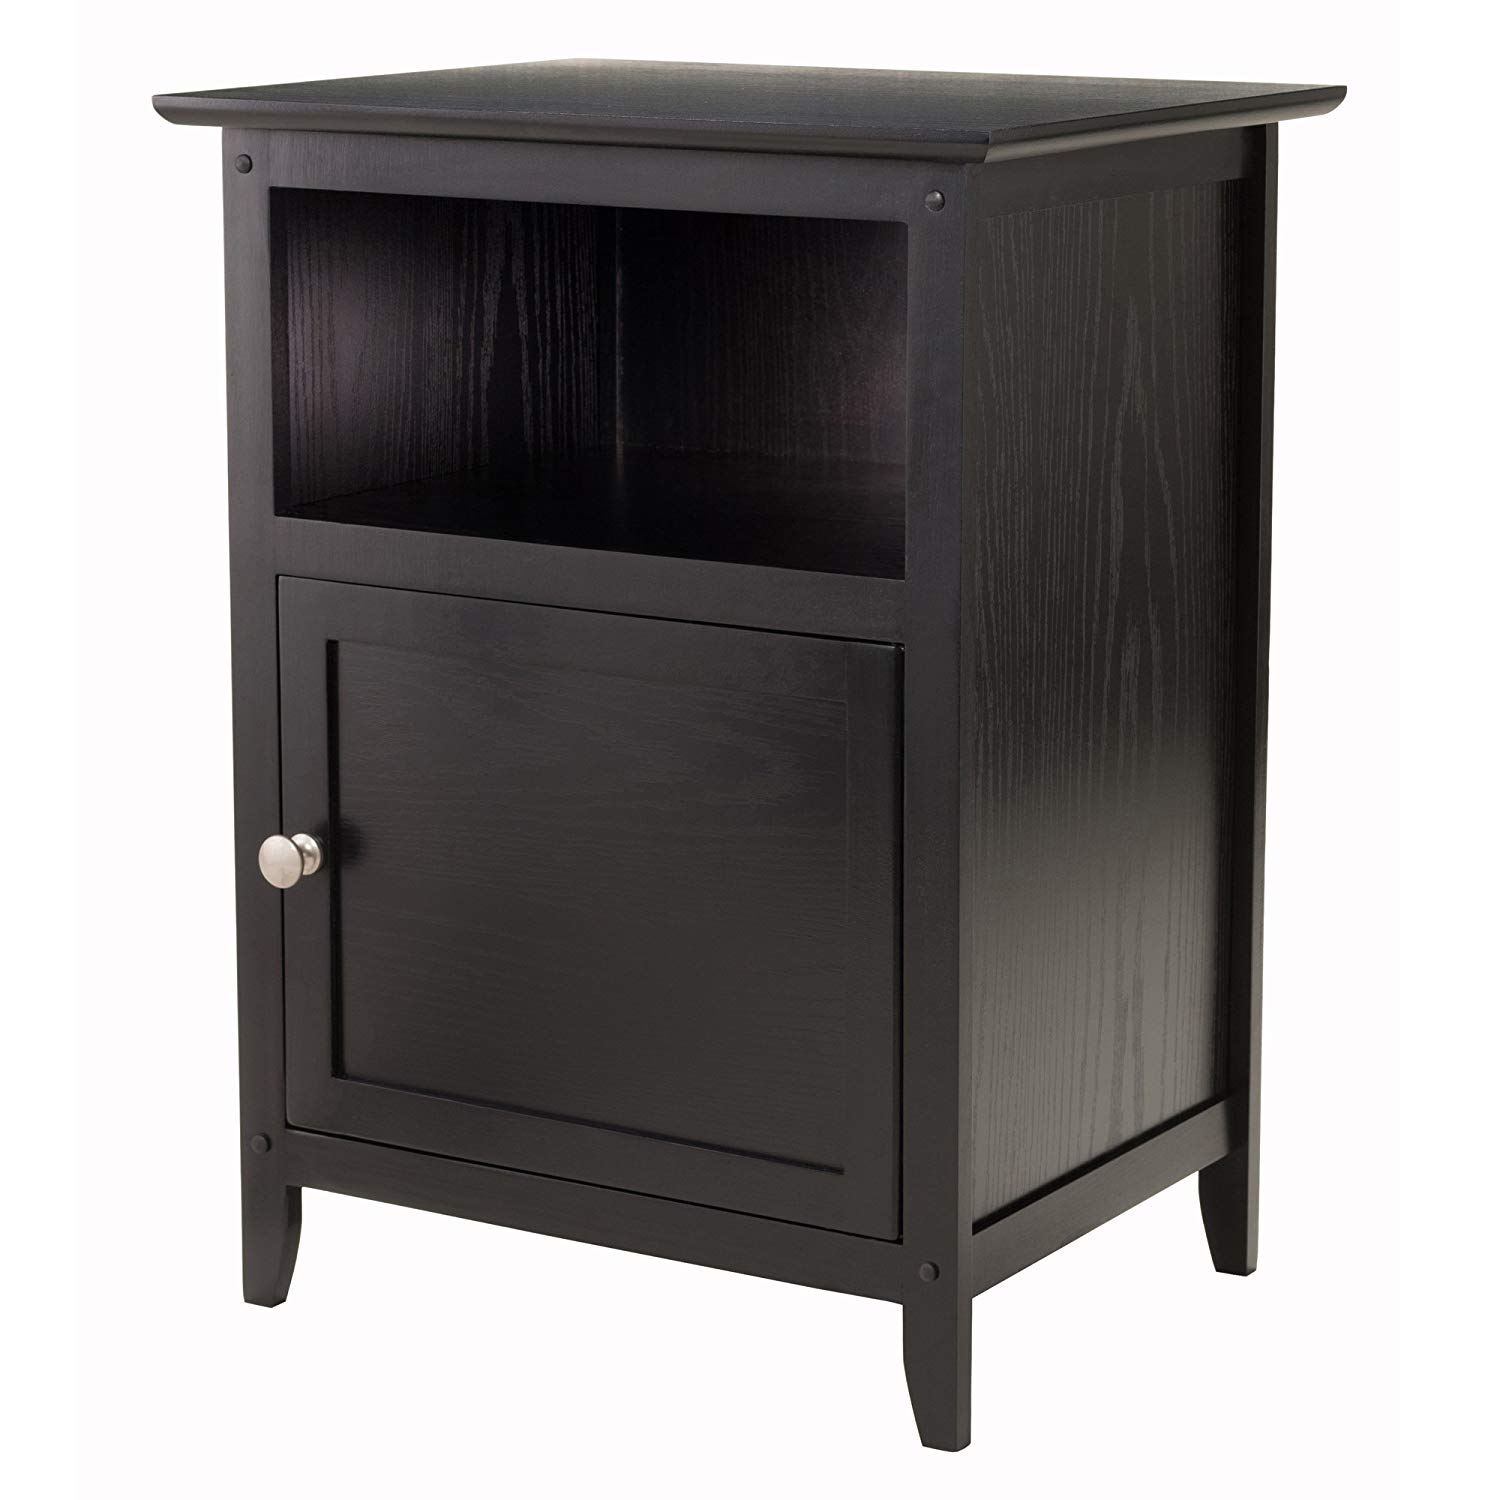 nightstands drawer accent table target winsome wood henry black white bedside cabinets tall metal dining room chairs west elm small silver mats spindle legs coffee kijiji beach